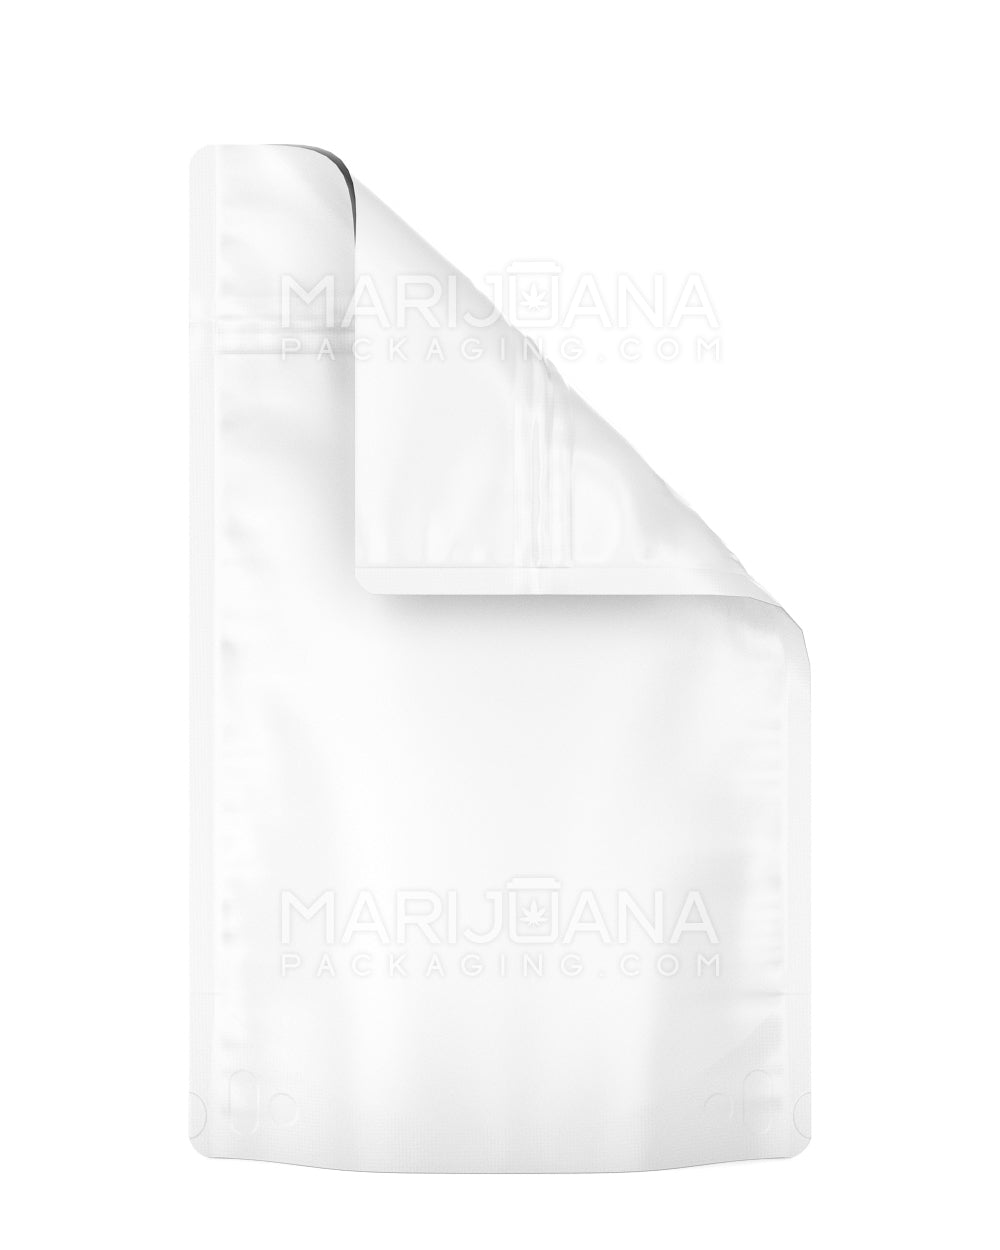 28g Mylar Bags, Resealable oz. Bag Packaging